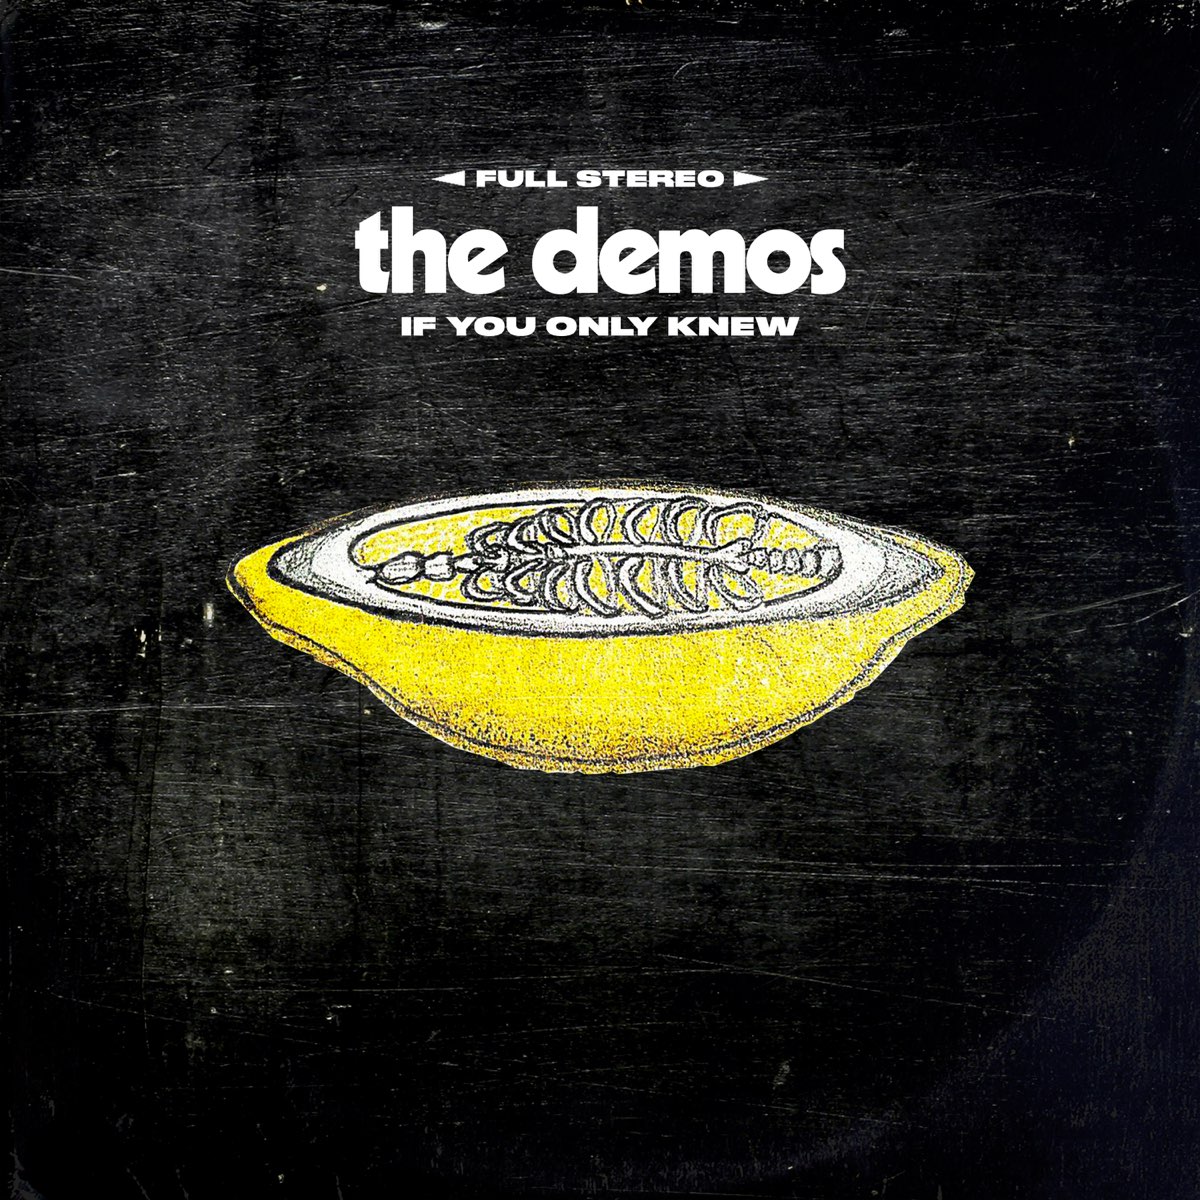 Demos. If you only knew. Demos музыка